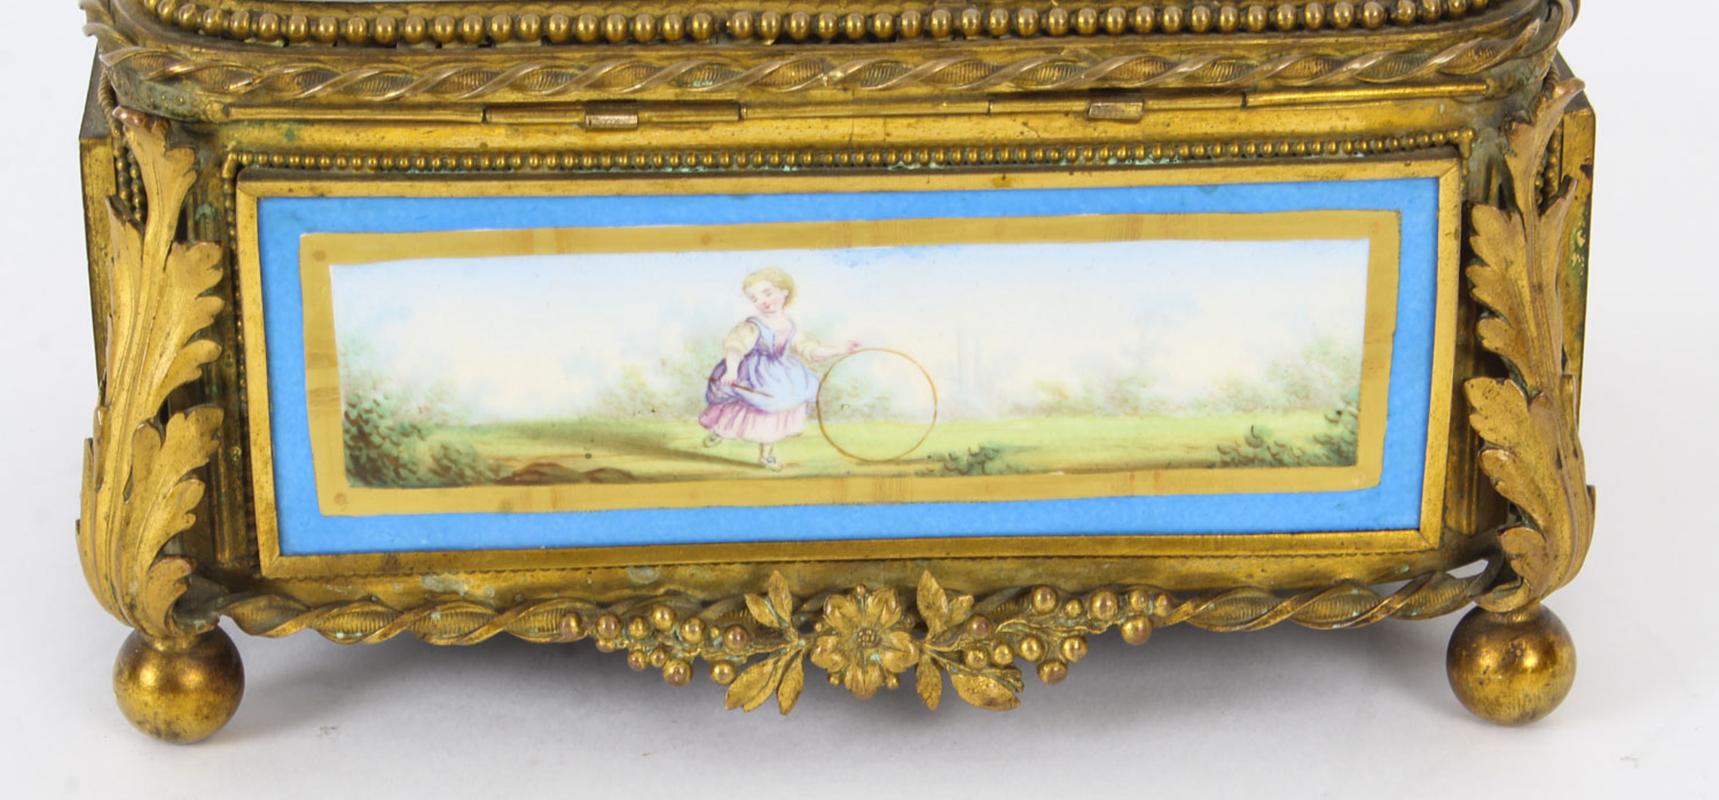 Antique French Sevres Porcelain and Ormolu Jewellery Casket 19th Century  For Sale 4